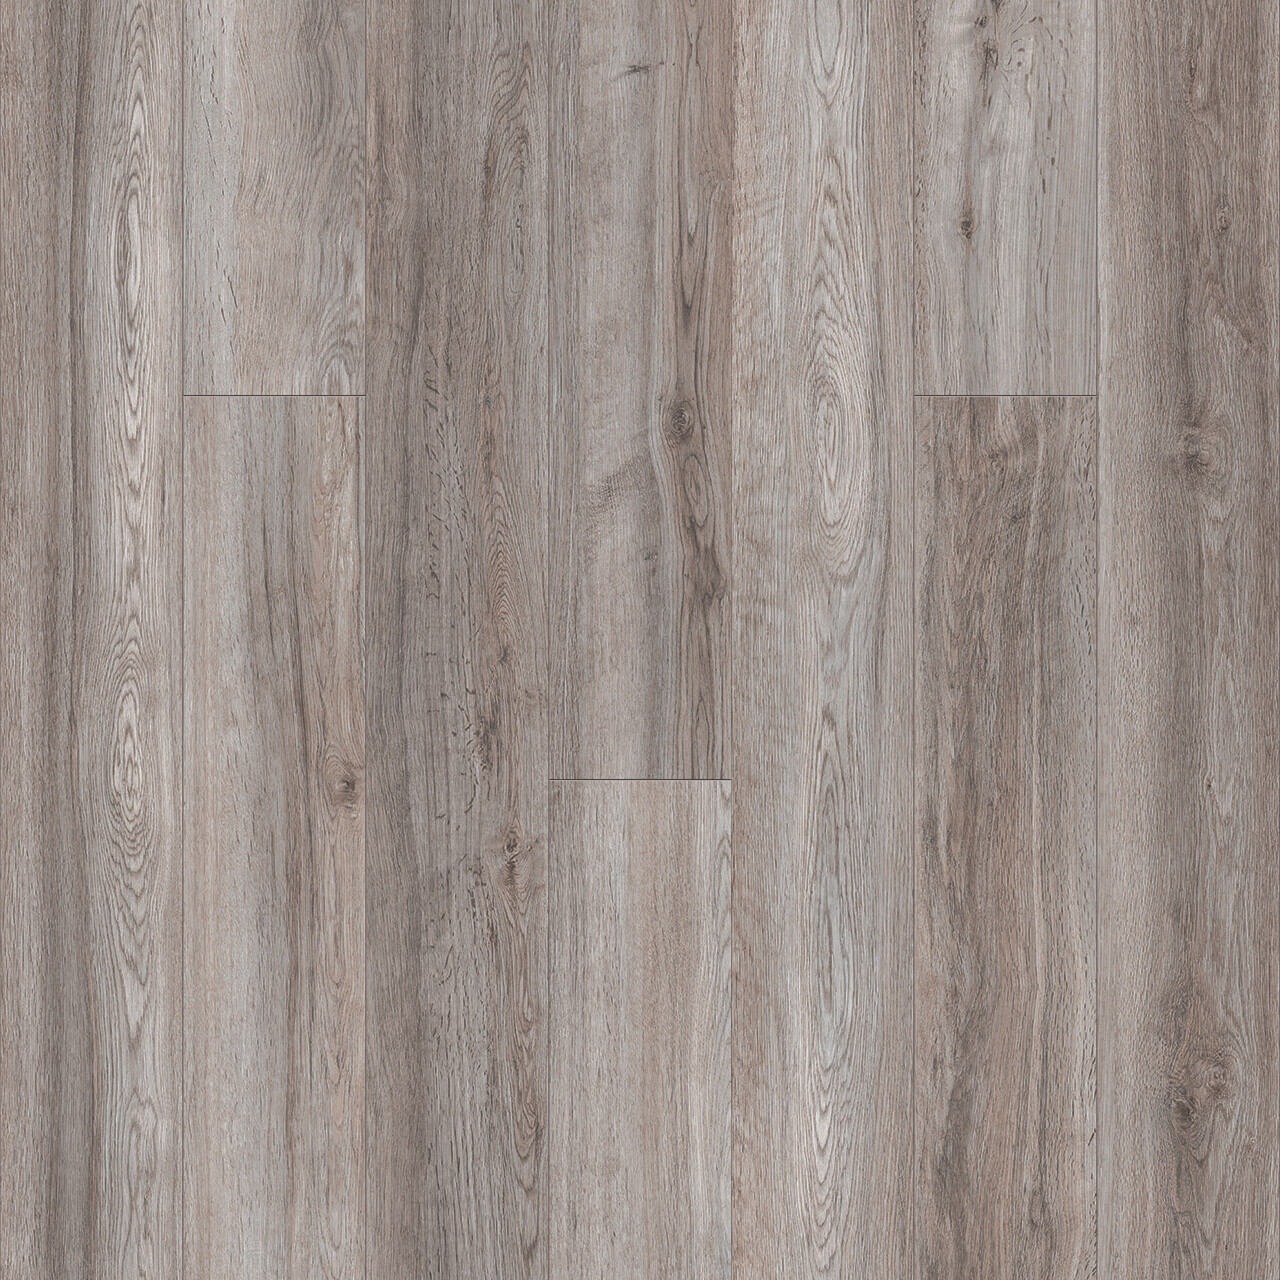 Engineered Floors - Wood Lux Collection - 8 in. x 54 in. - Milford Sound